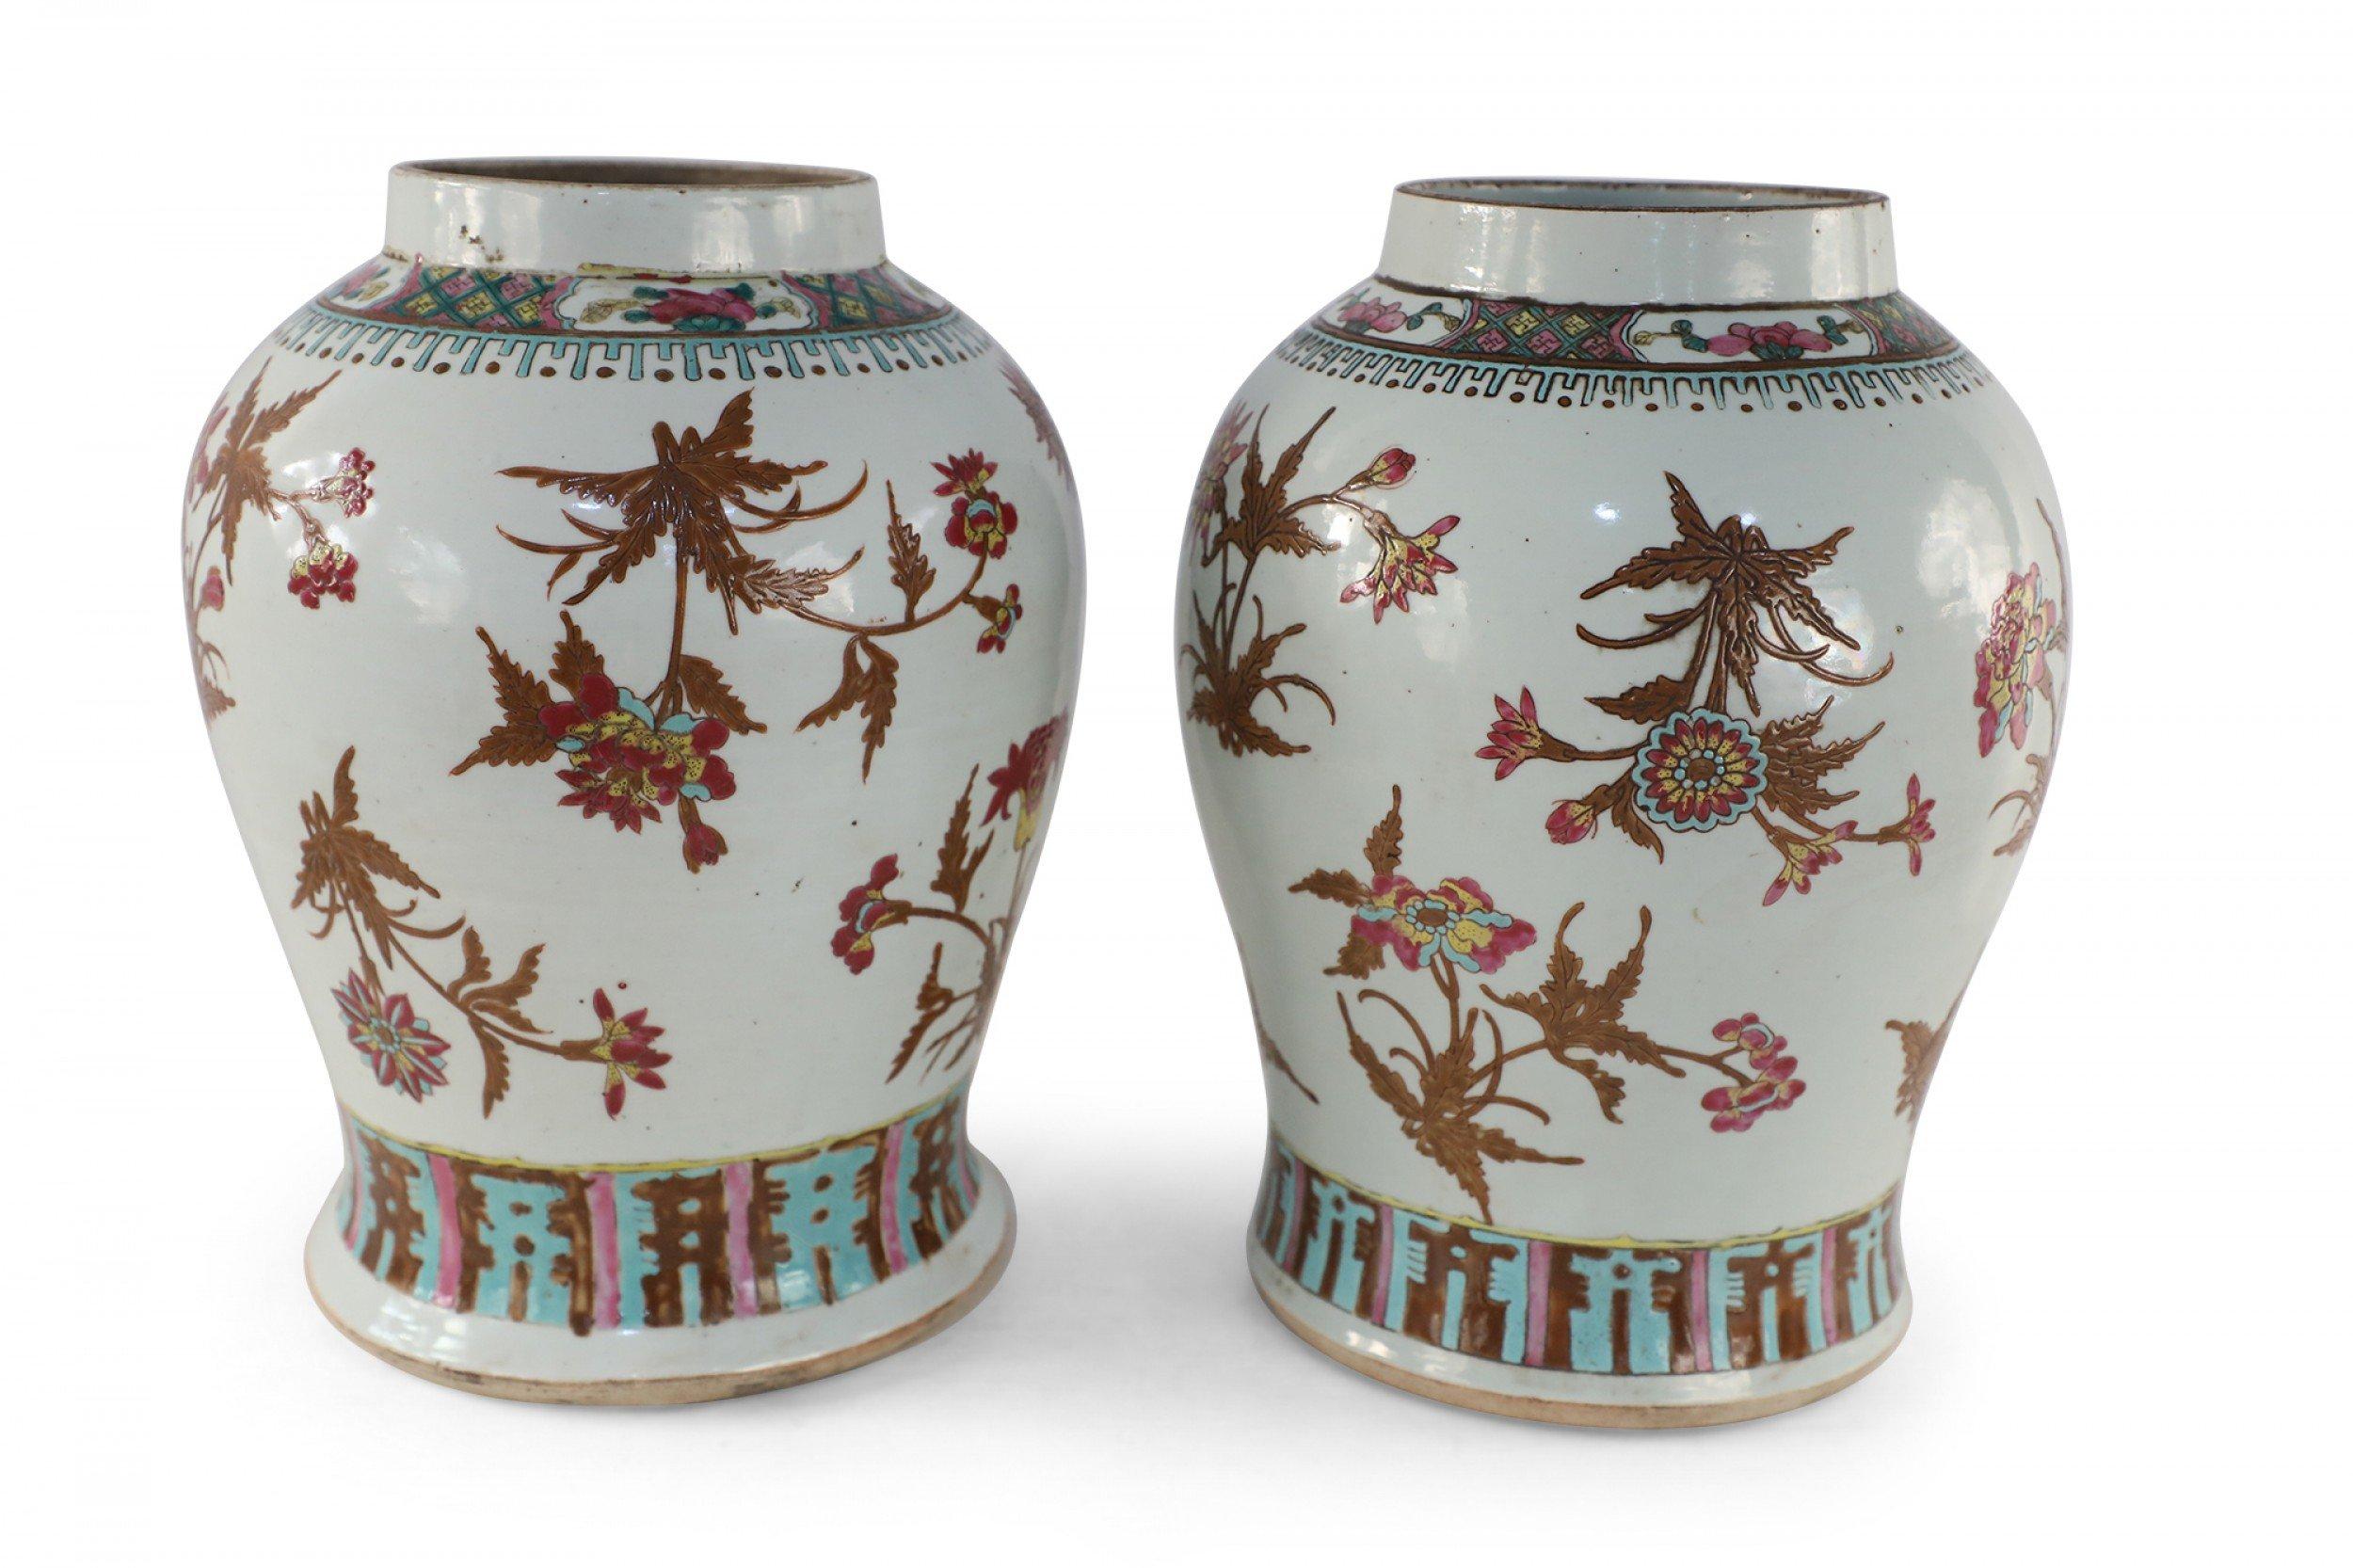 Pair of Chinese White and Maroon Floral Motif Porcelain Vases For Sale 1